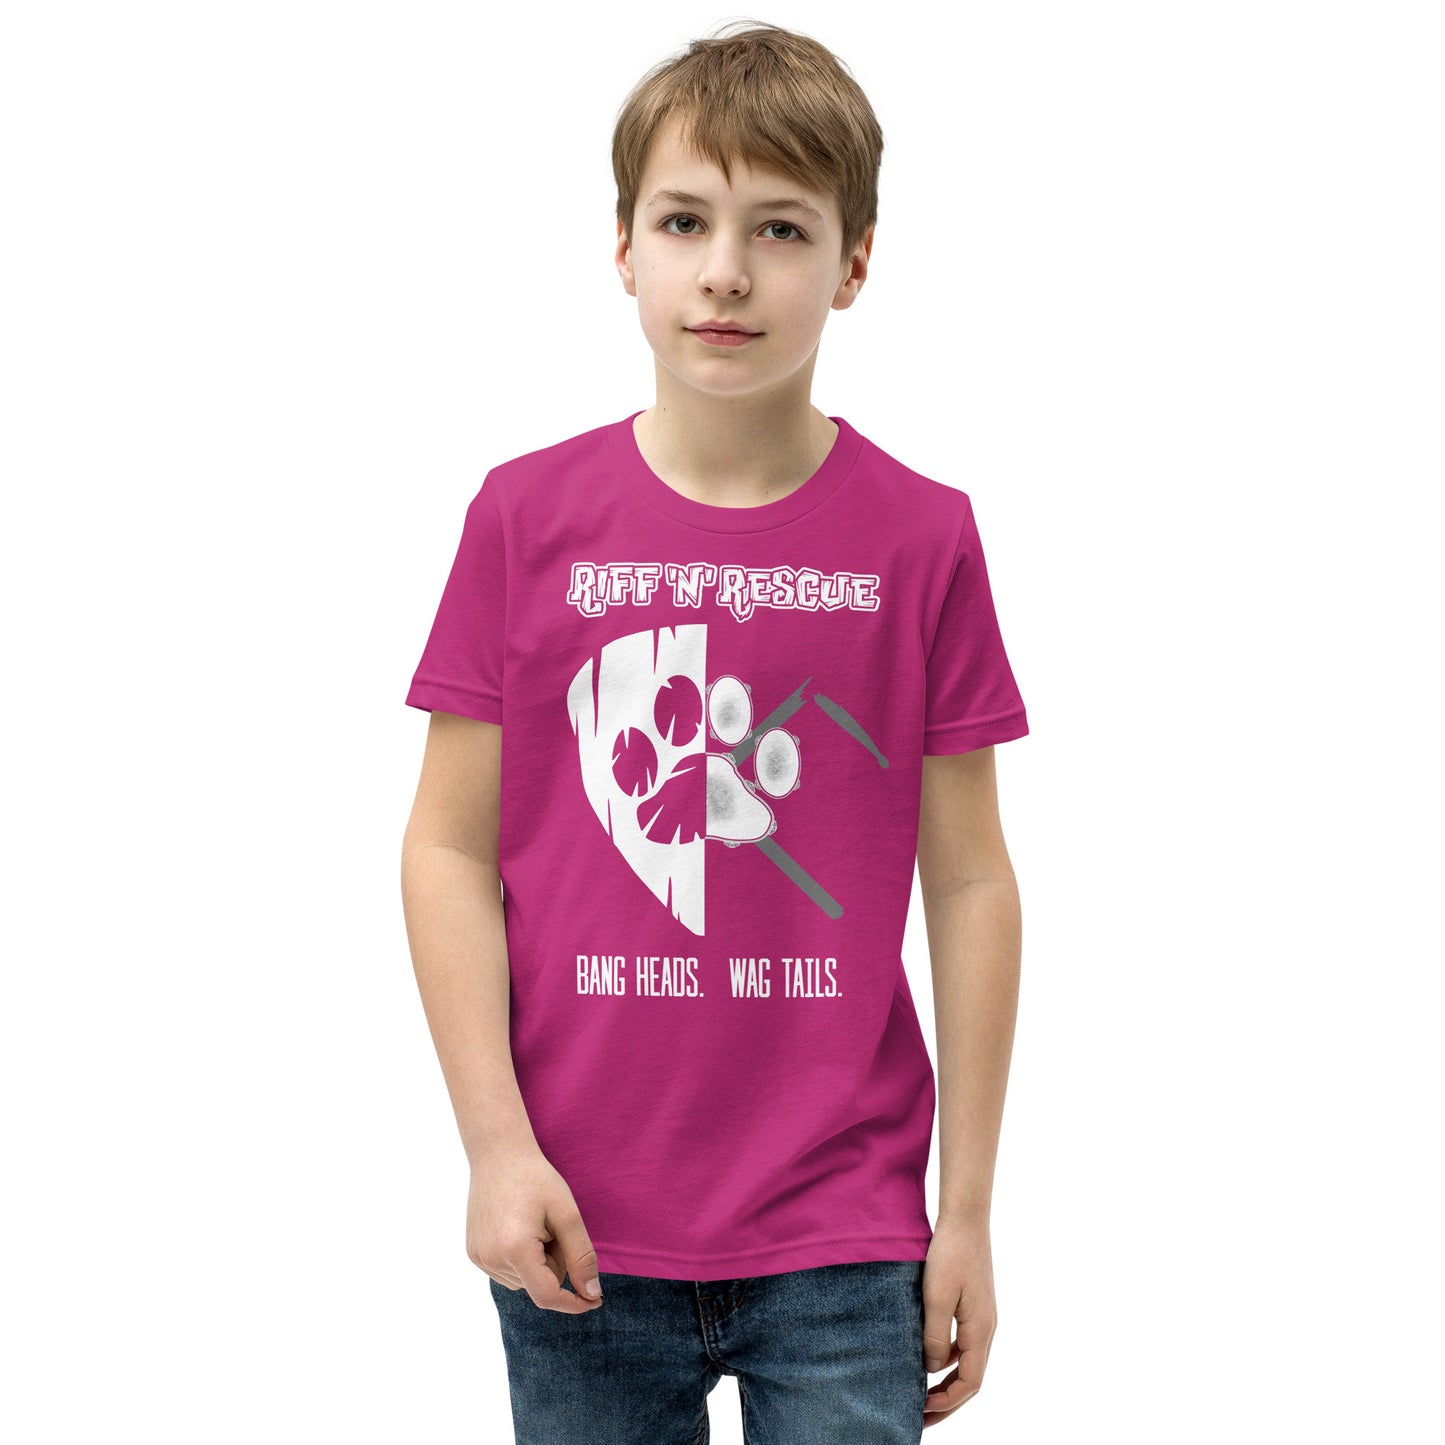 Picks, Sticks and Puppies Youth Short Sleeve T-Shirt